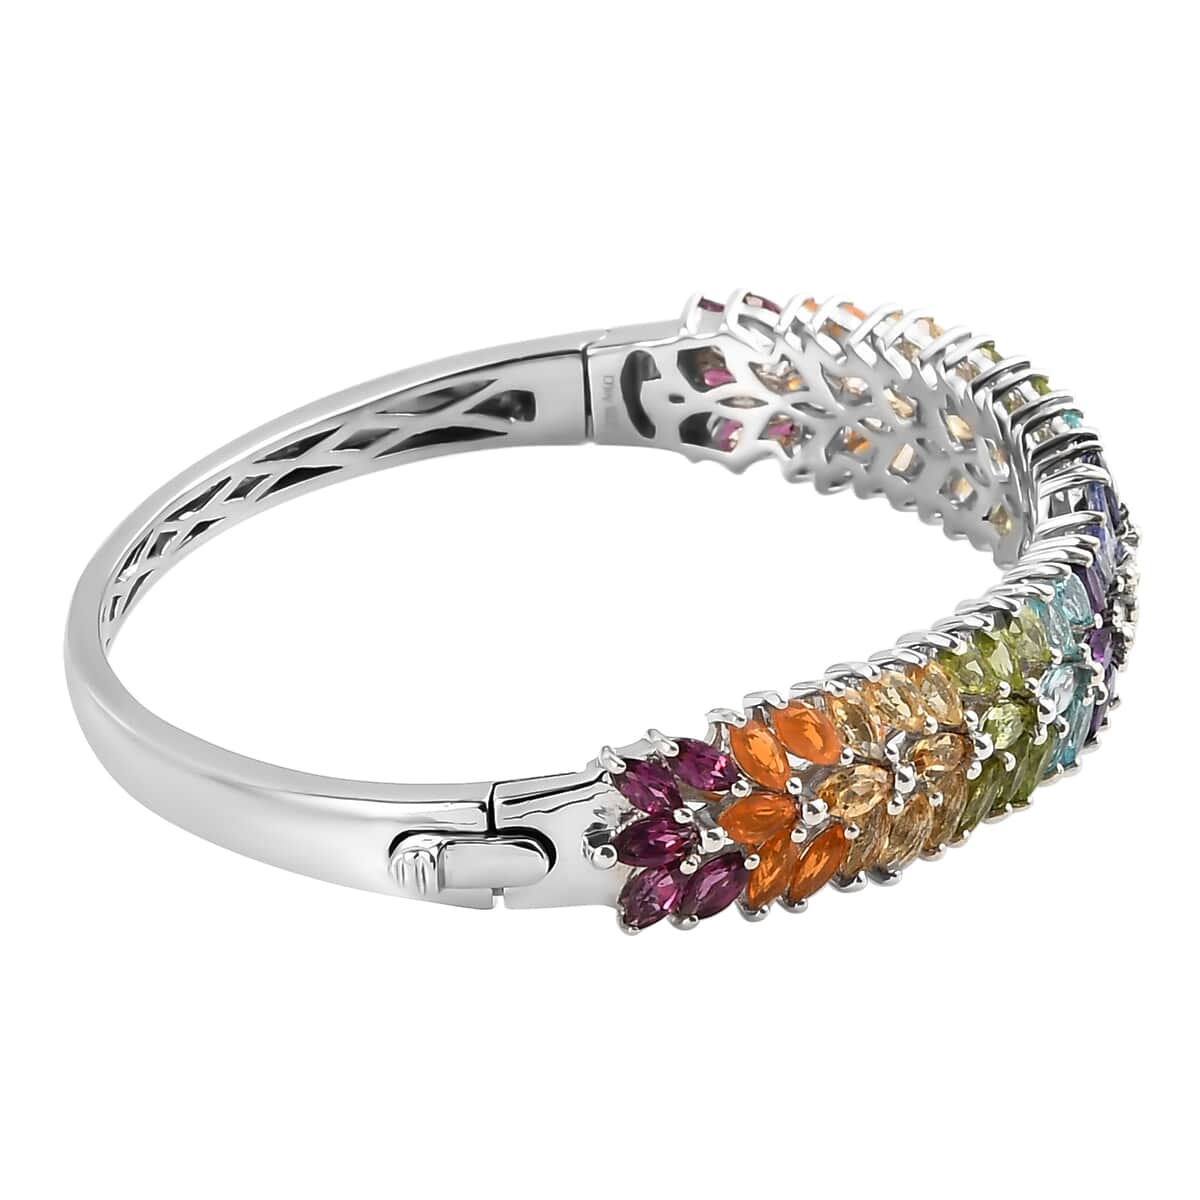 Floral Spray Multi-gemstone Bangle Bracelet For Women in Platinum Plated Sterling Silver with Push Clasp 7.5 Inches image number 2